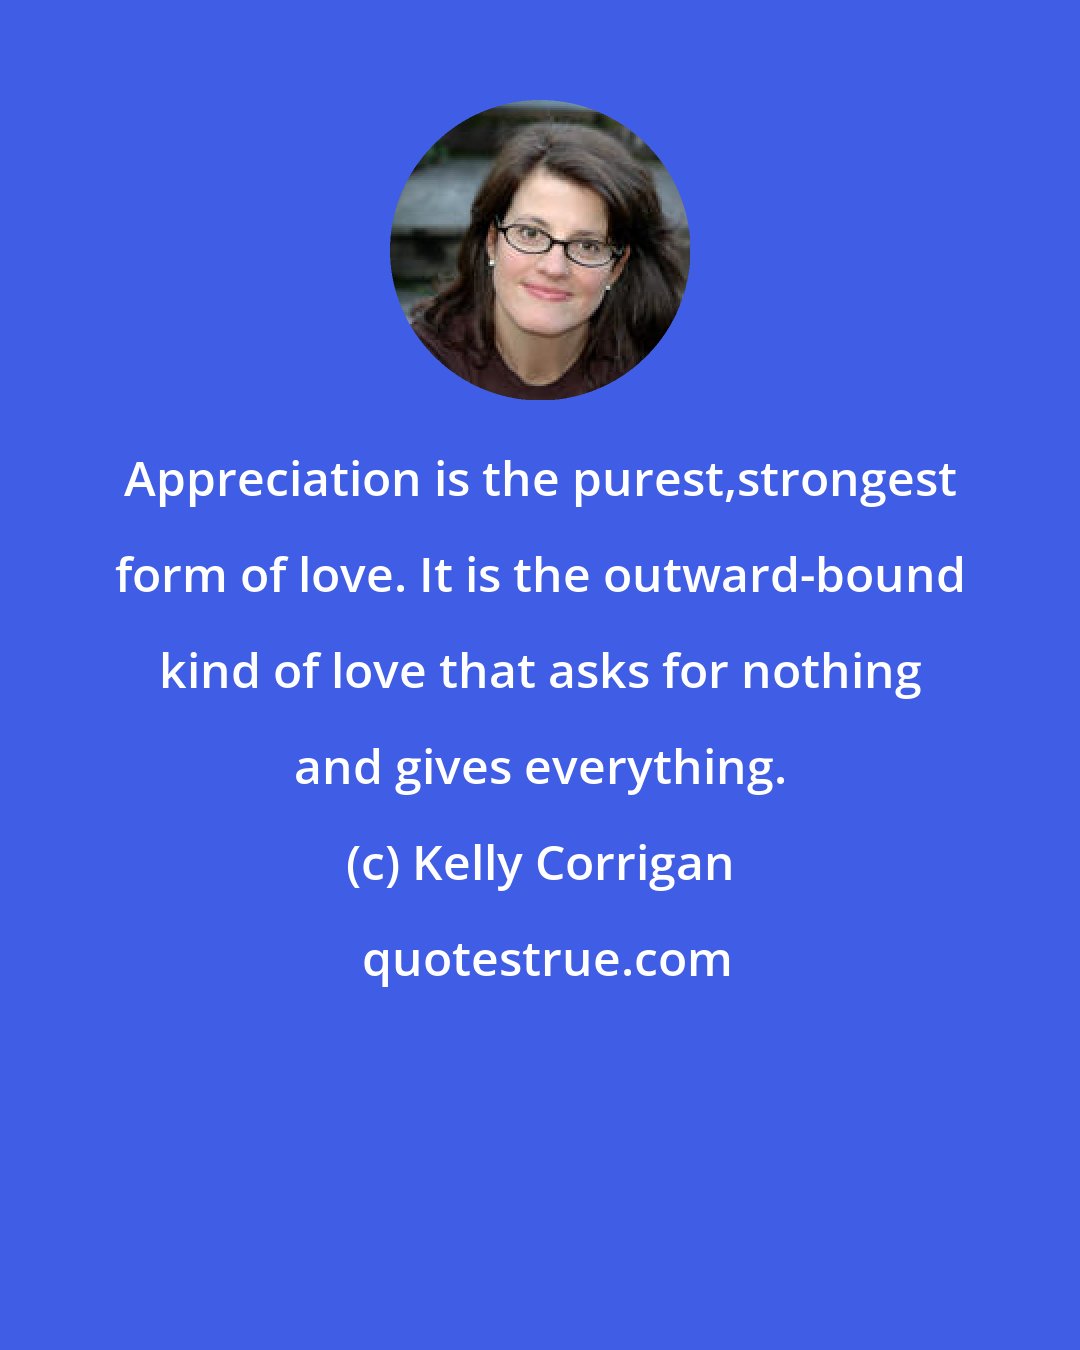 Kelly Corrigan: Appreciation is the purest,strongest form of love. It is the outward-bound kind of love that asks for nothing and gives everything.